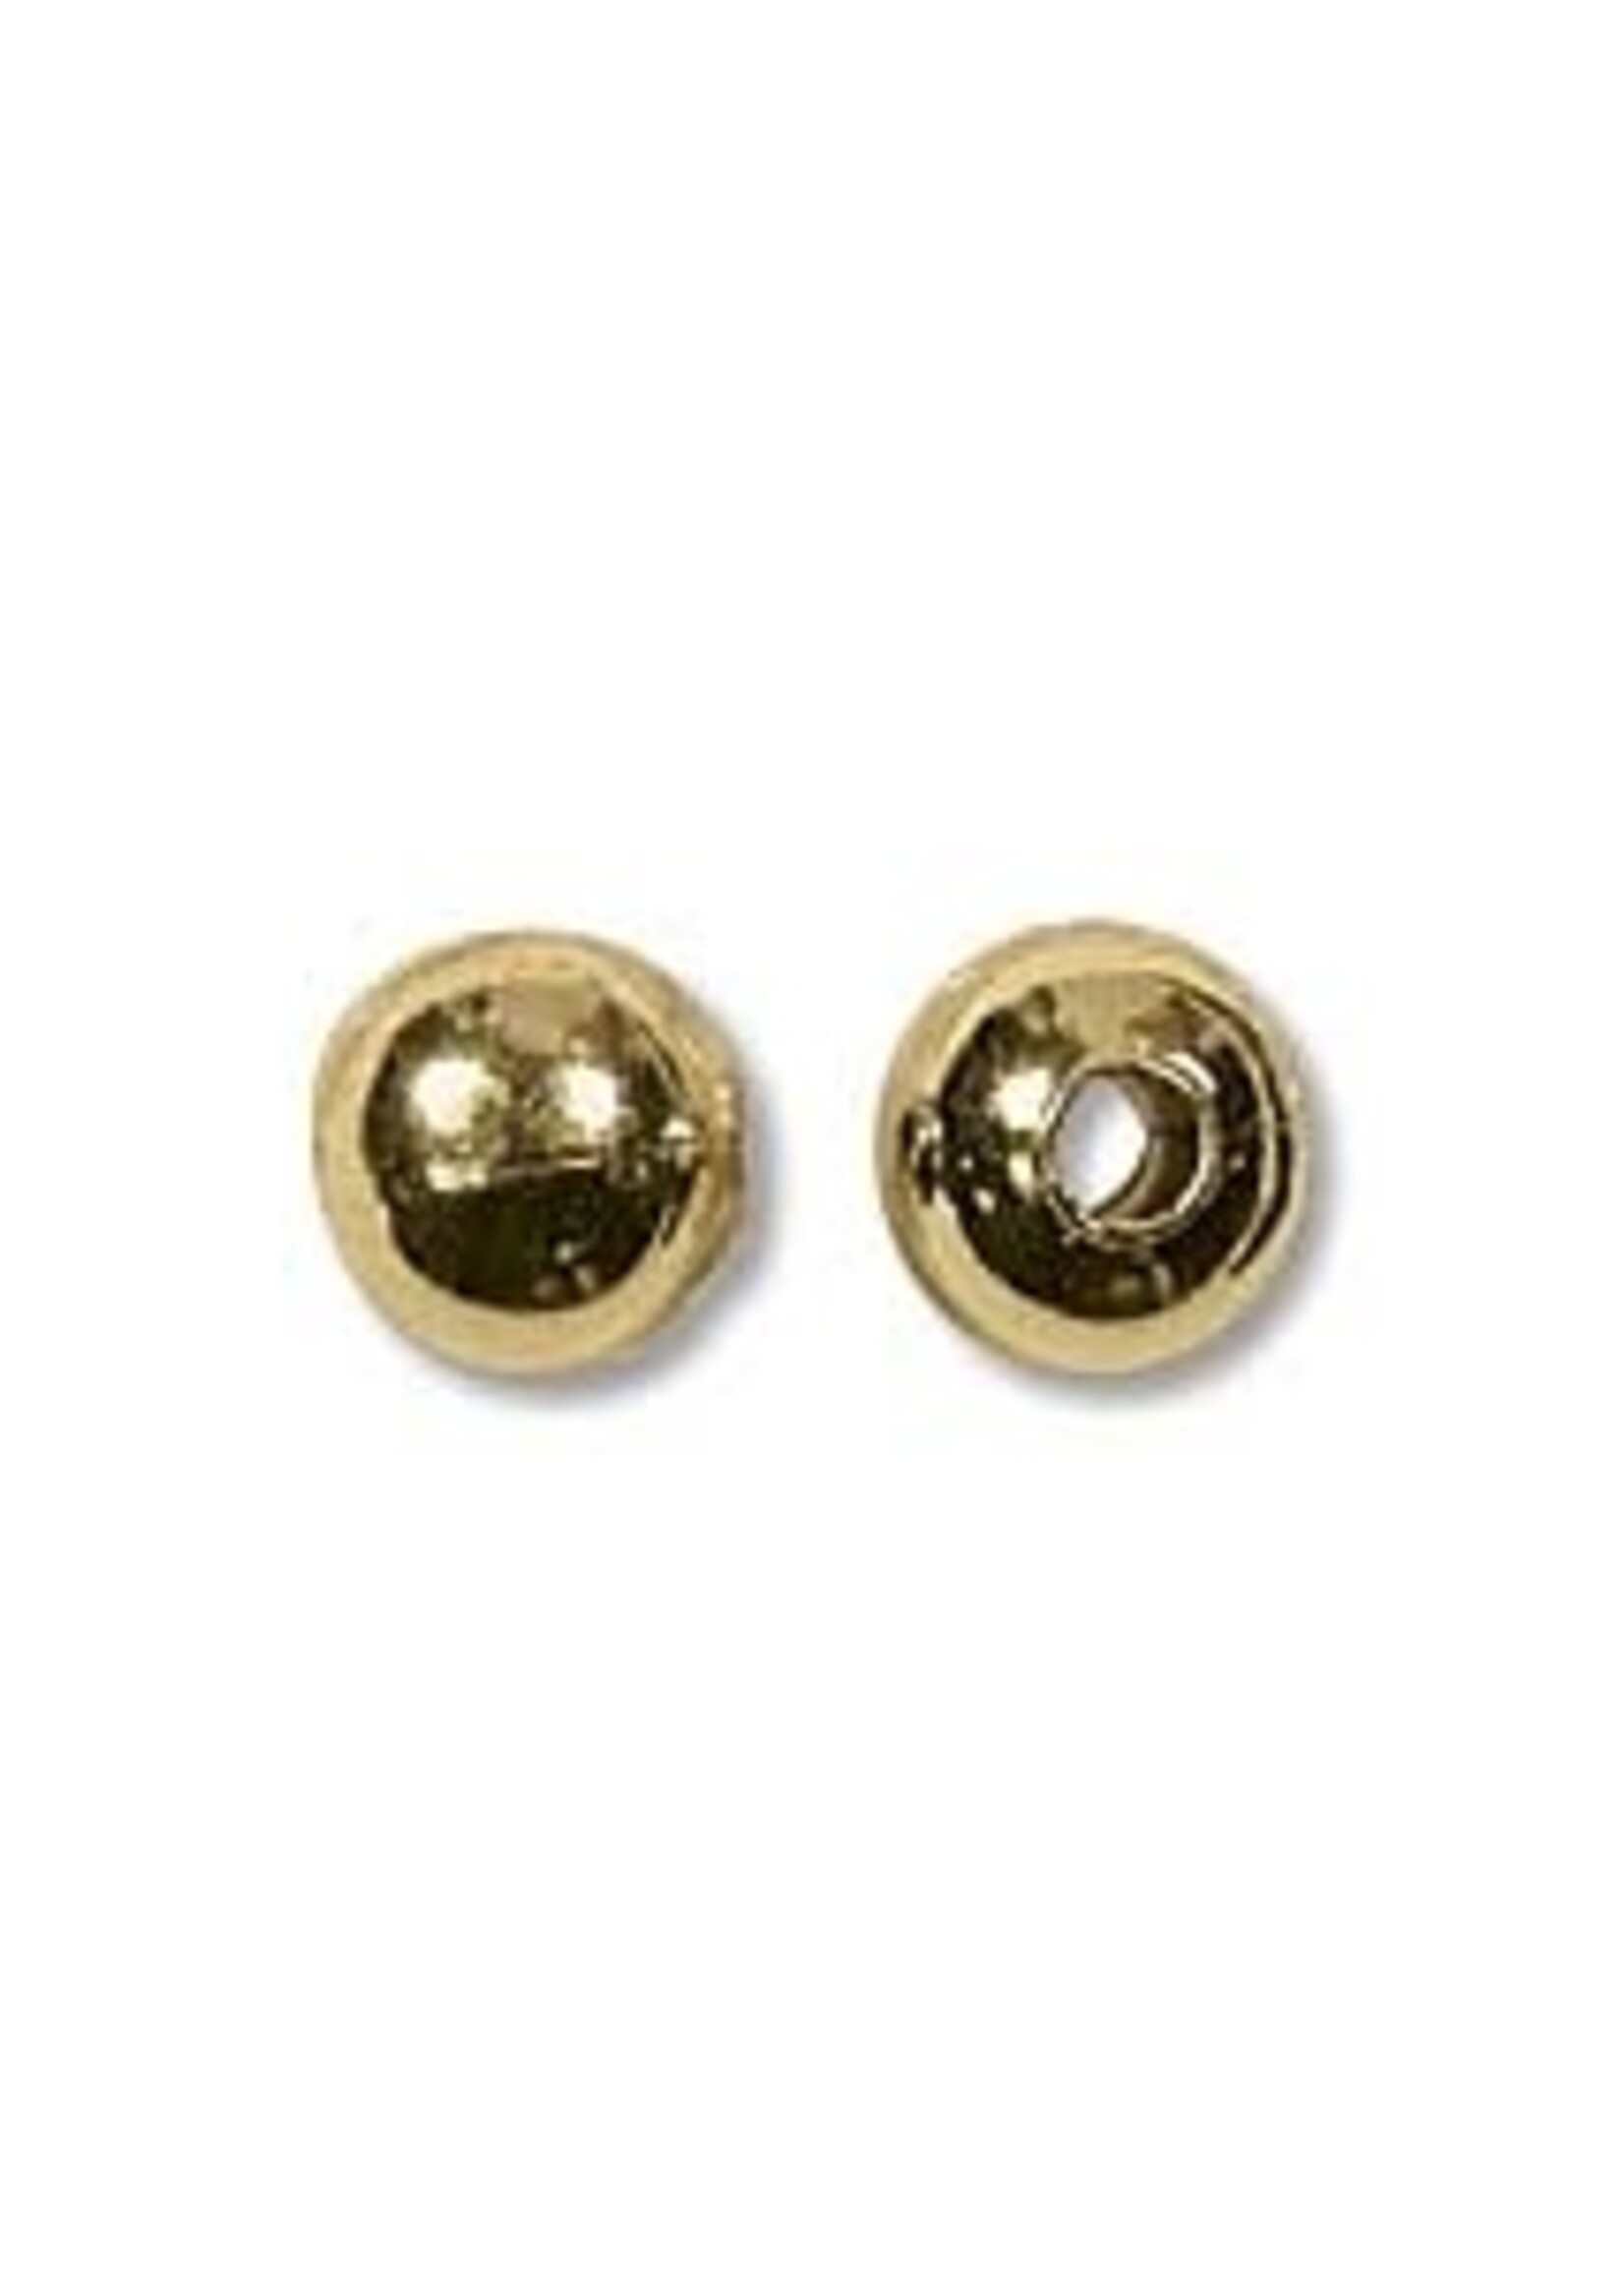 3mm Round Beads Gold Plated Qty 144